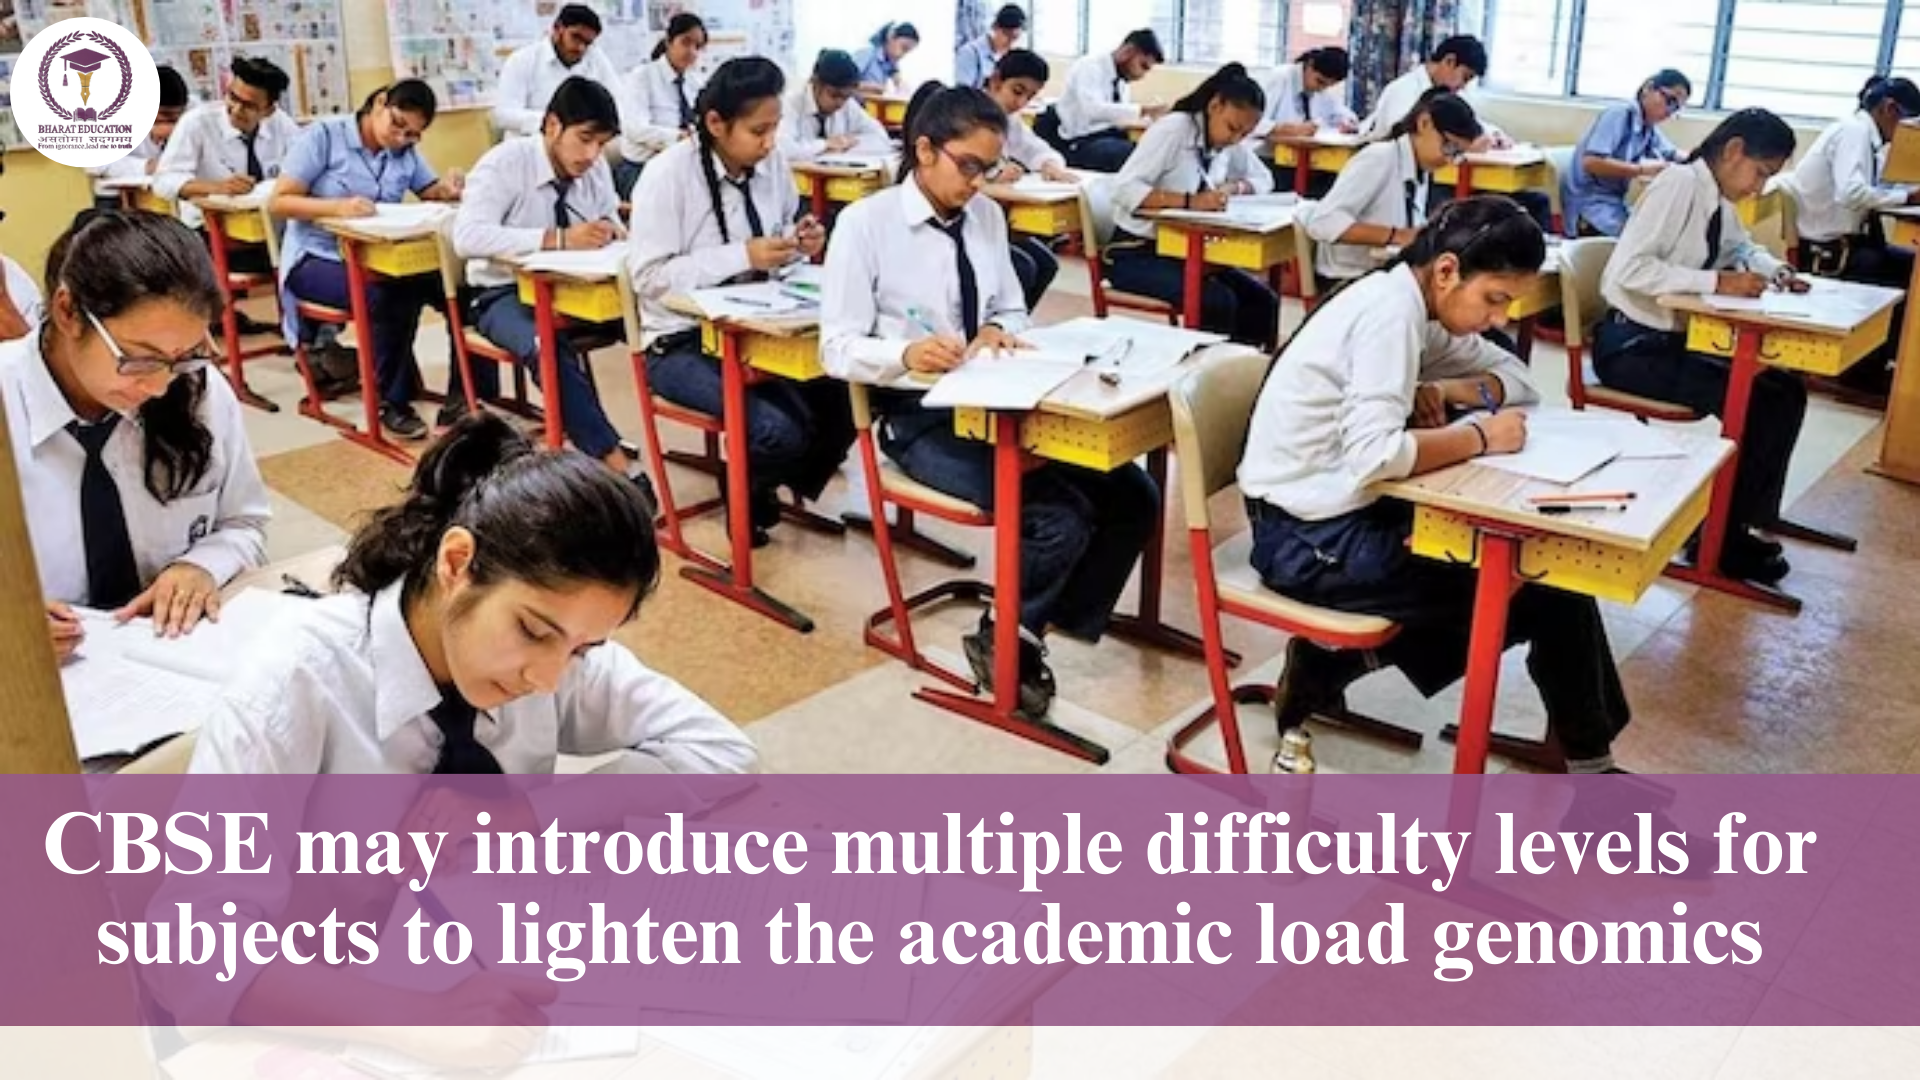 CBSE may introduce multiple difficulty levels for subjects to lighten the academic load genomics